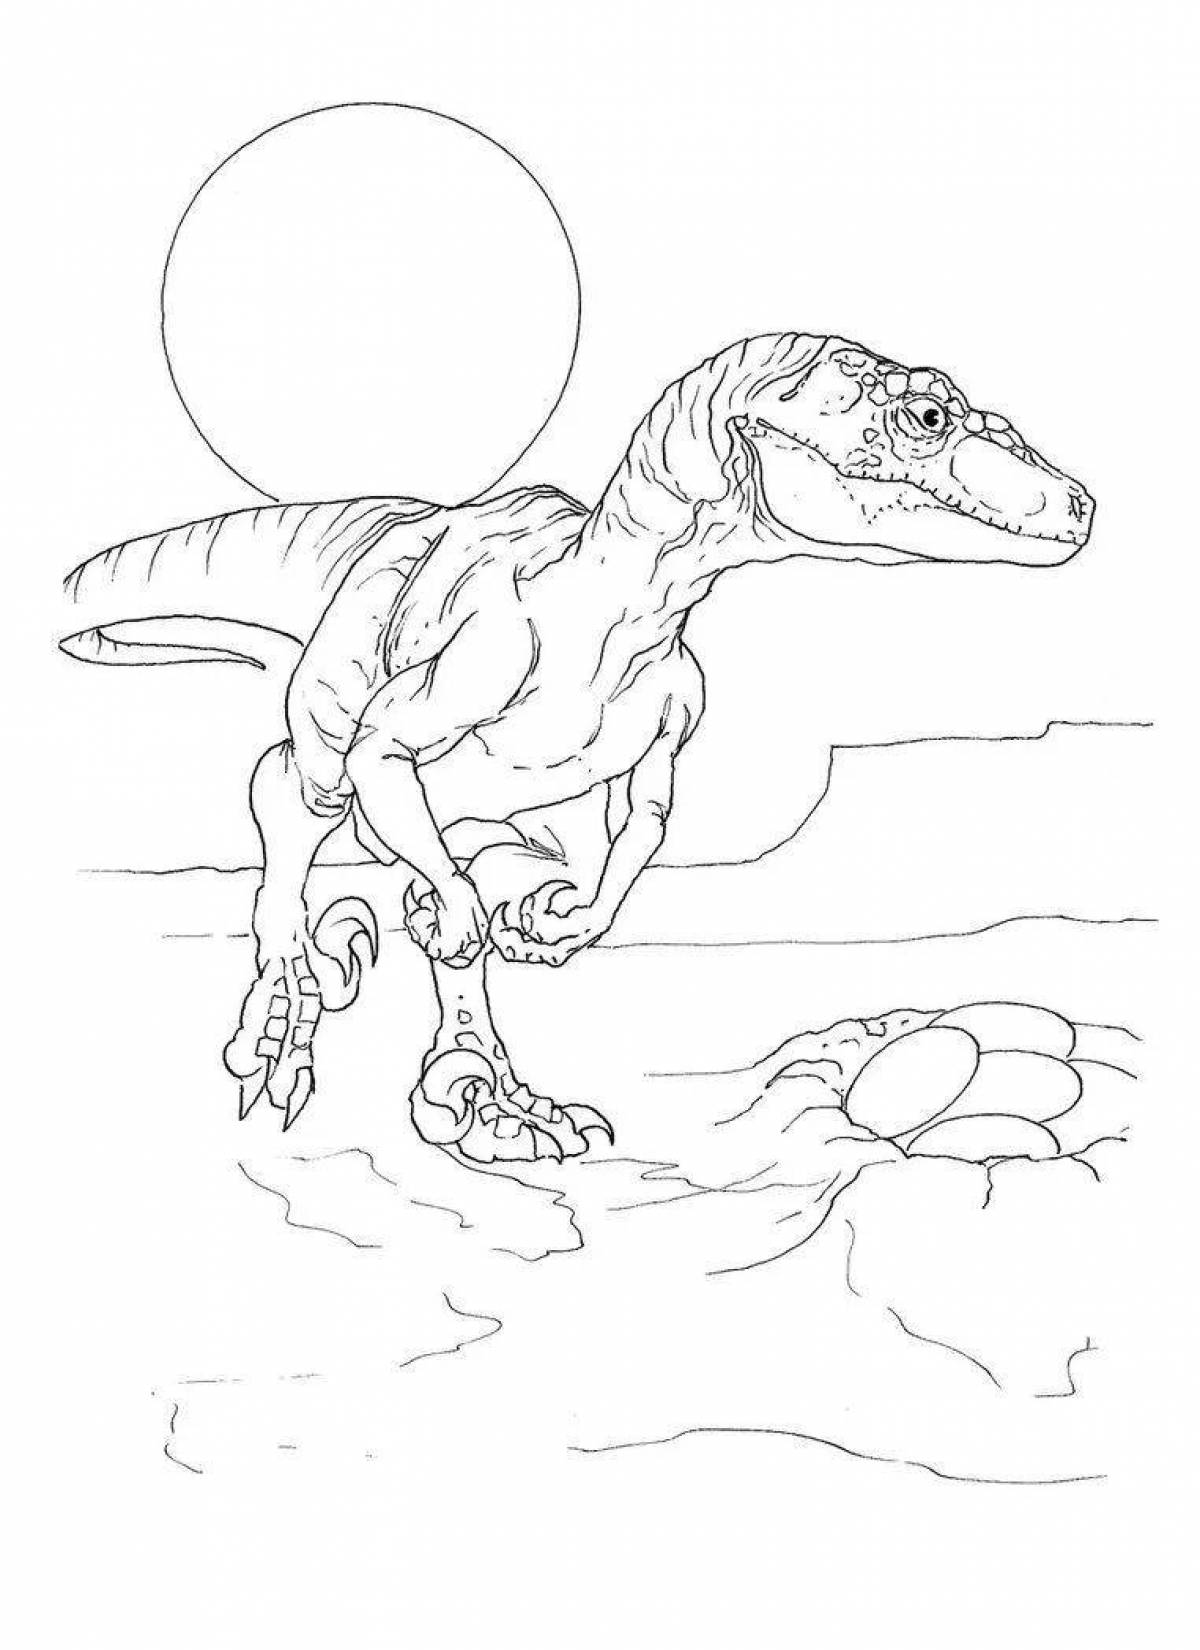 Coloring page glowing velociraptor from jurassic world